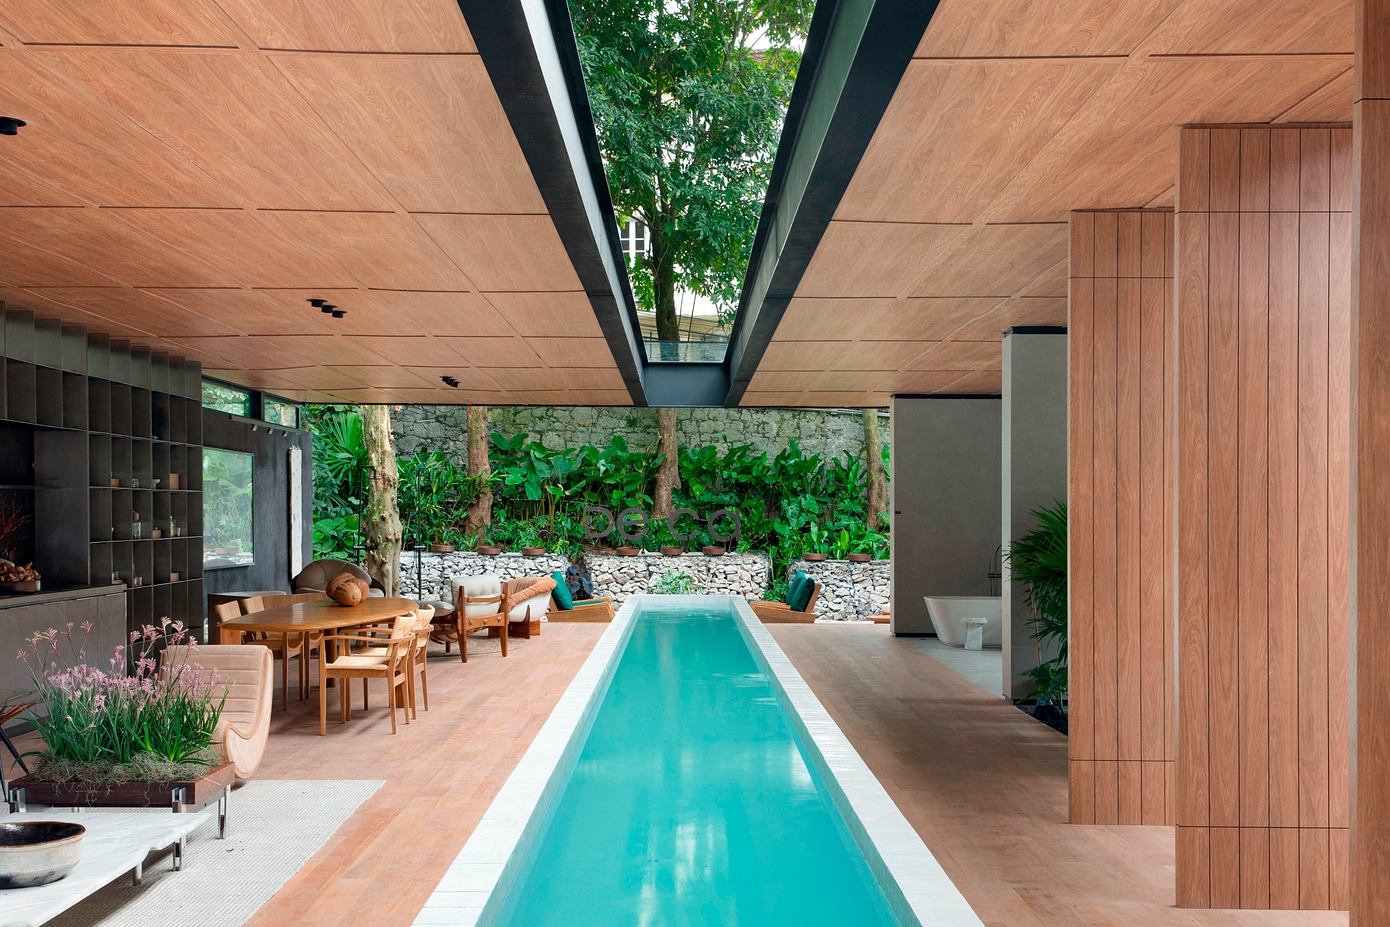 Deca Pavilion: Modernist Influences in Rio’s Newest House